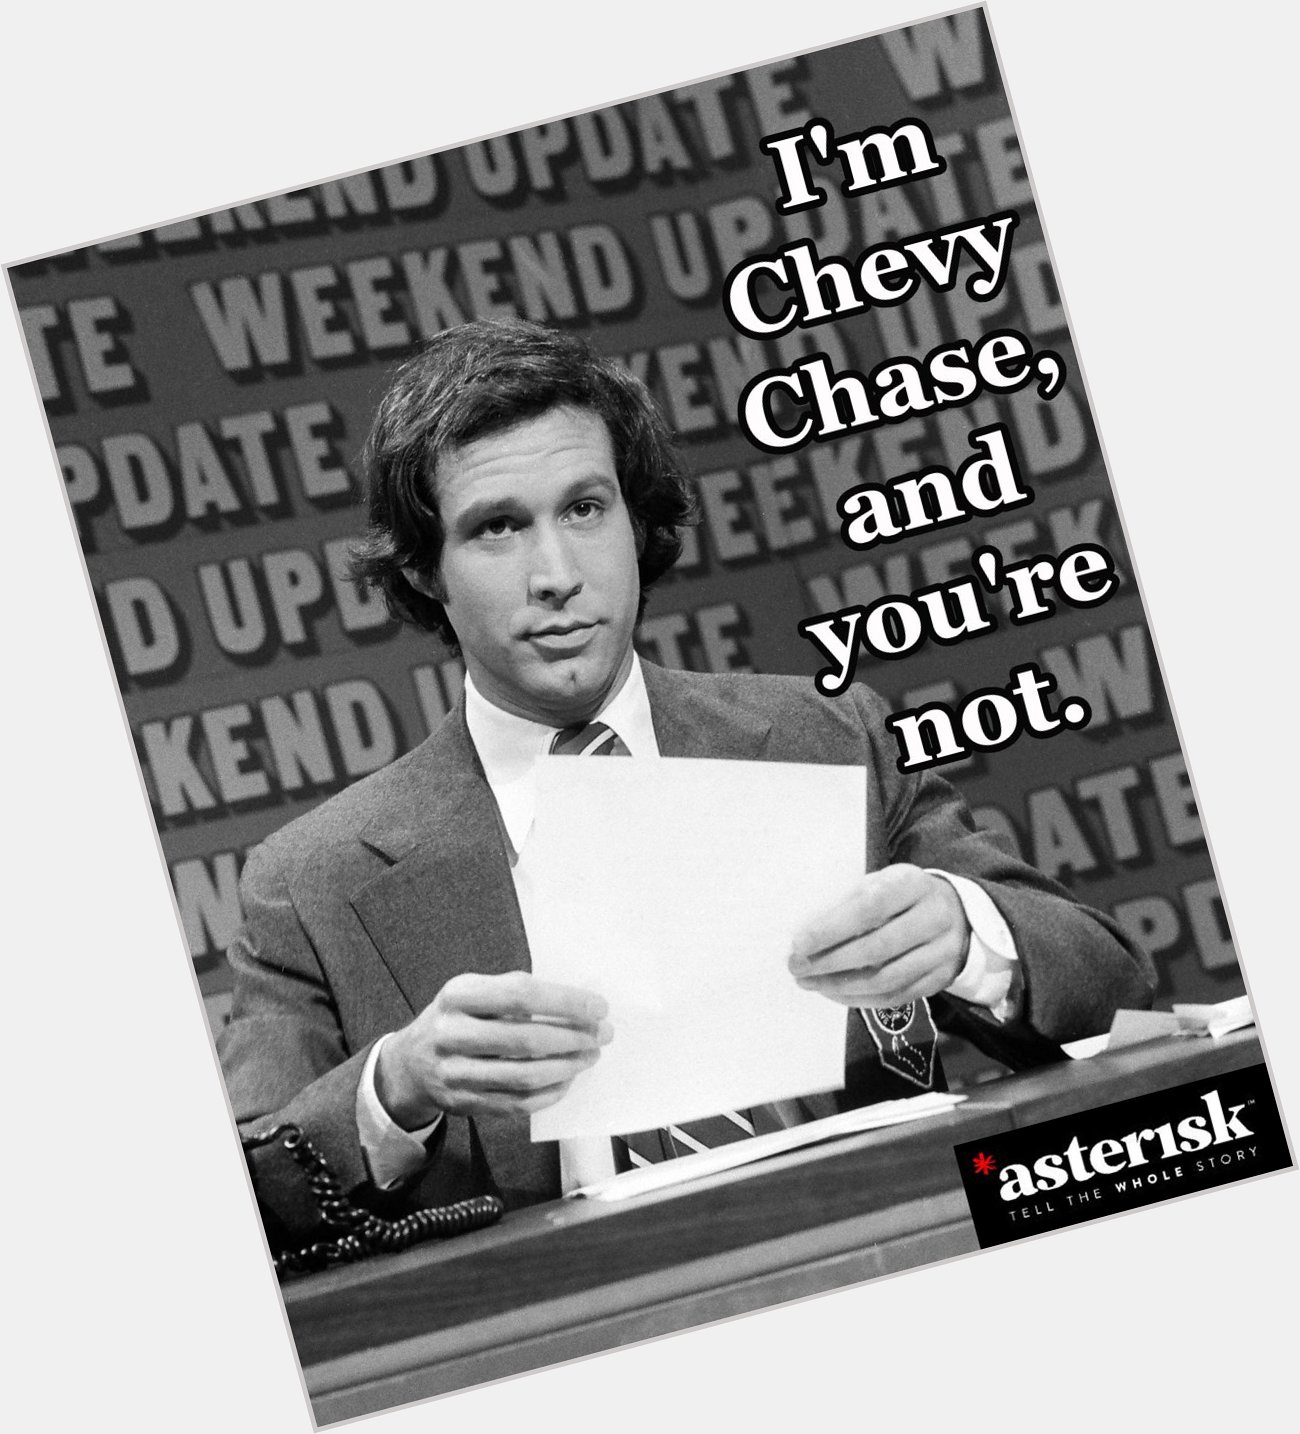 He\s the birthday boy, and you\re not. Happy 72nd birthday, Chevy Chase.  